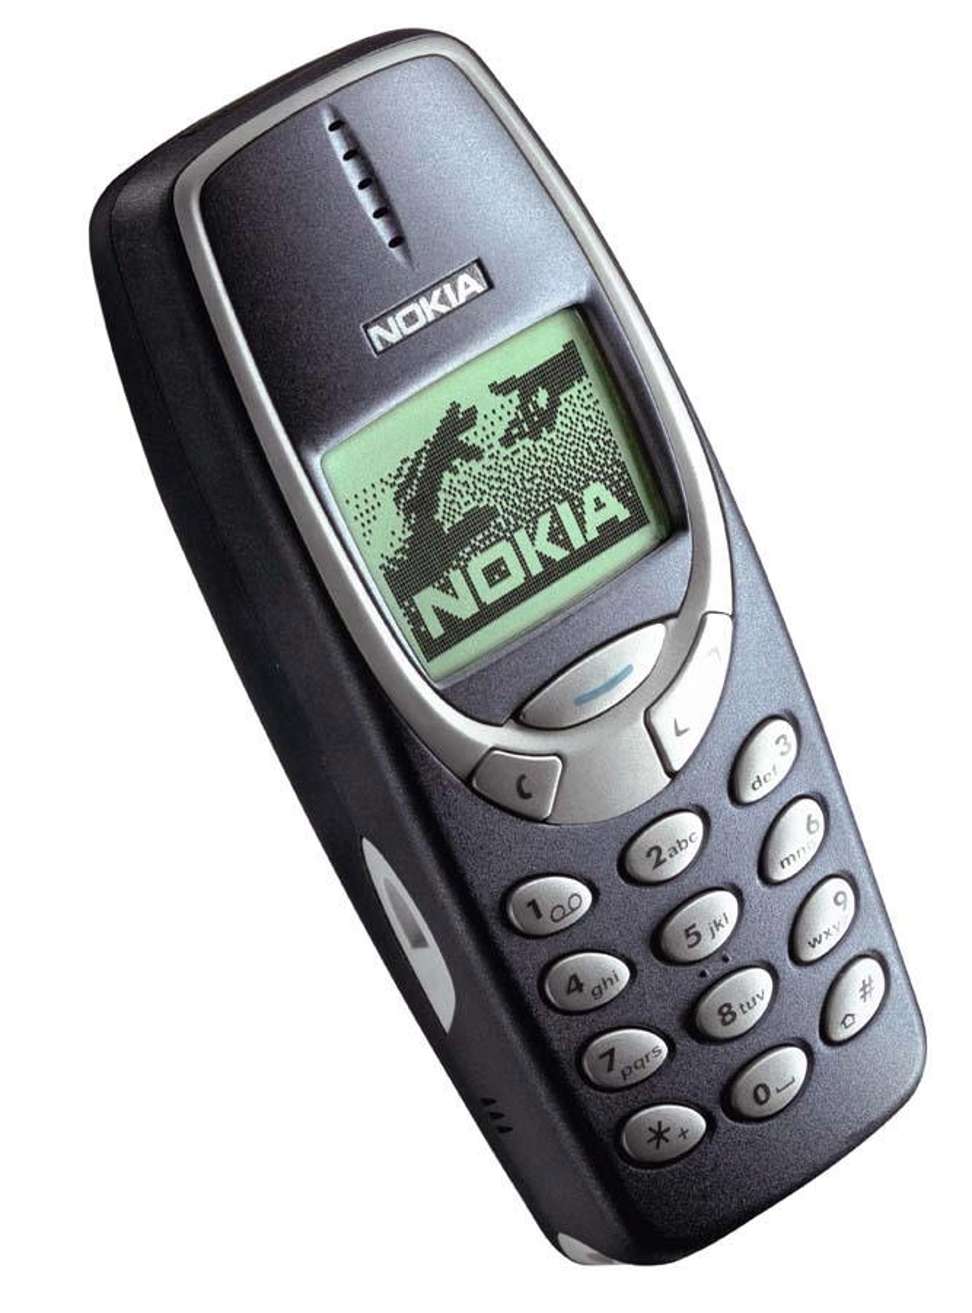 The Nokia 3310 was famous for being near-indestructible. Photo: Nokia